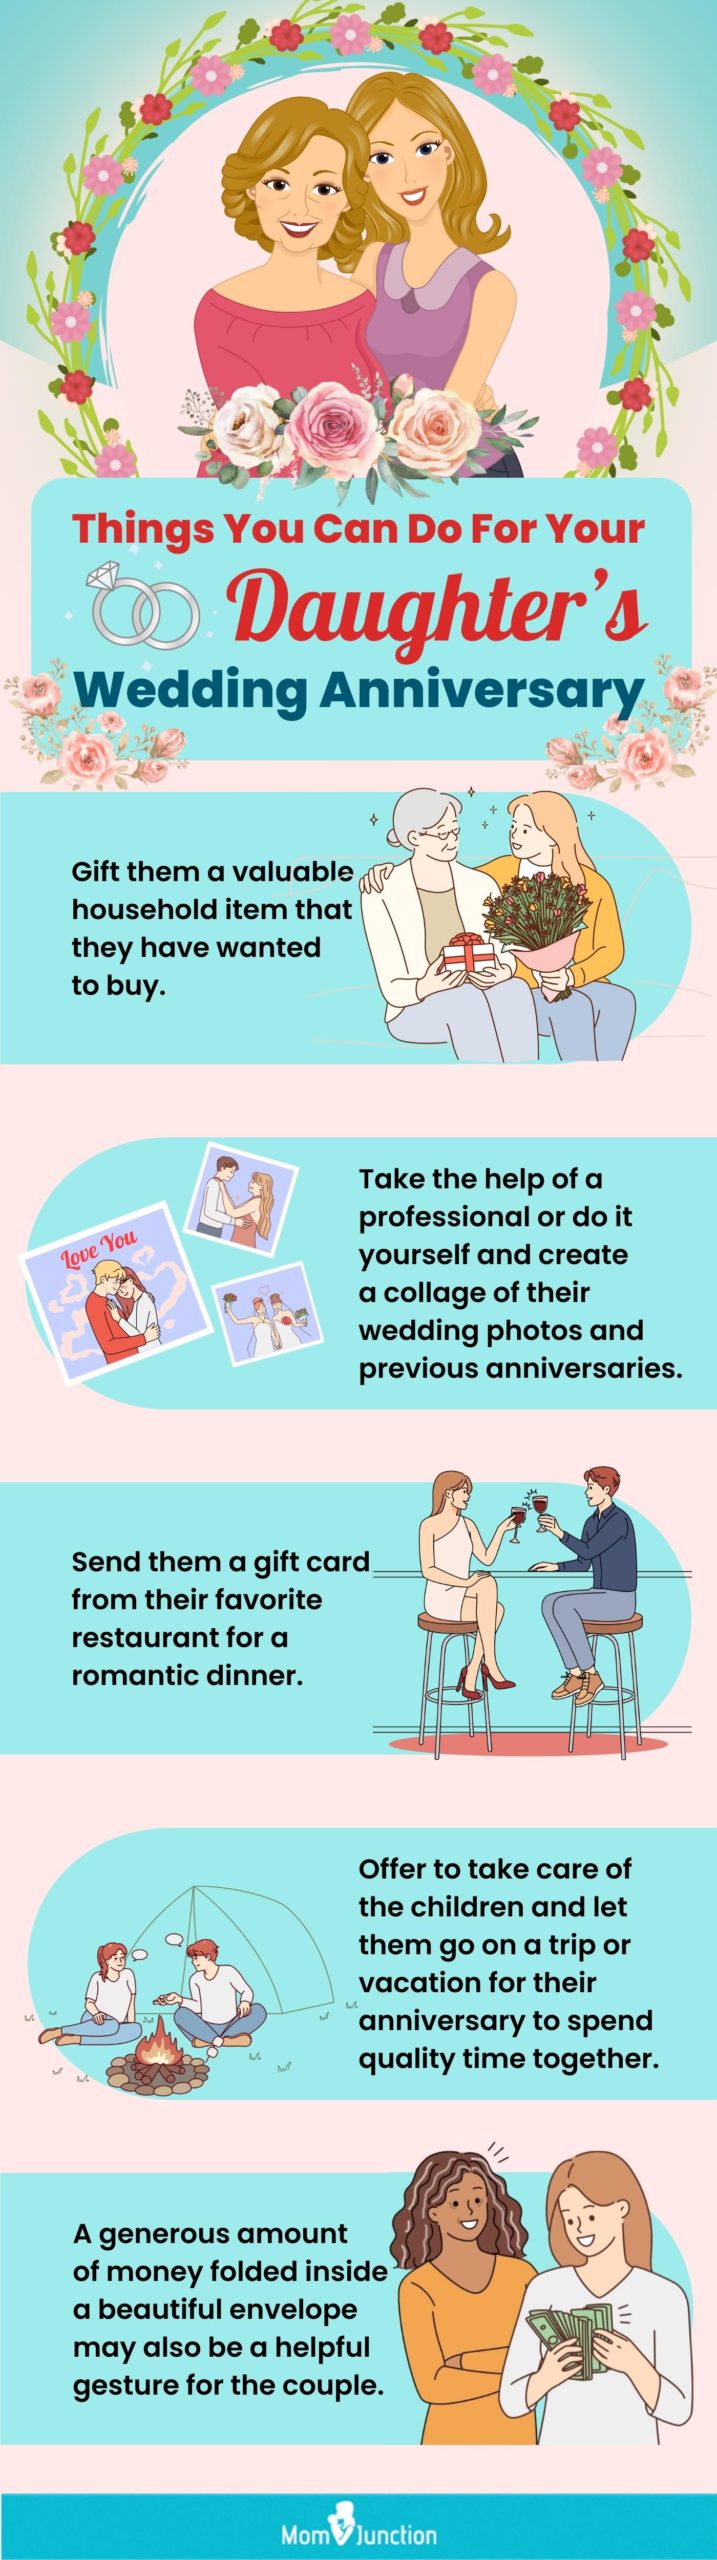 things you can do For your daughters wedding anniversary [infographic]